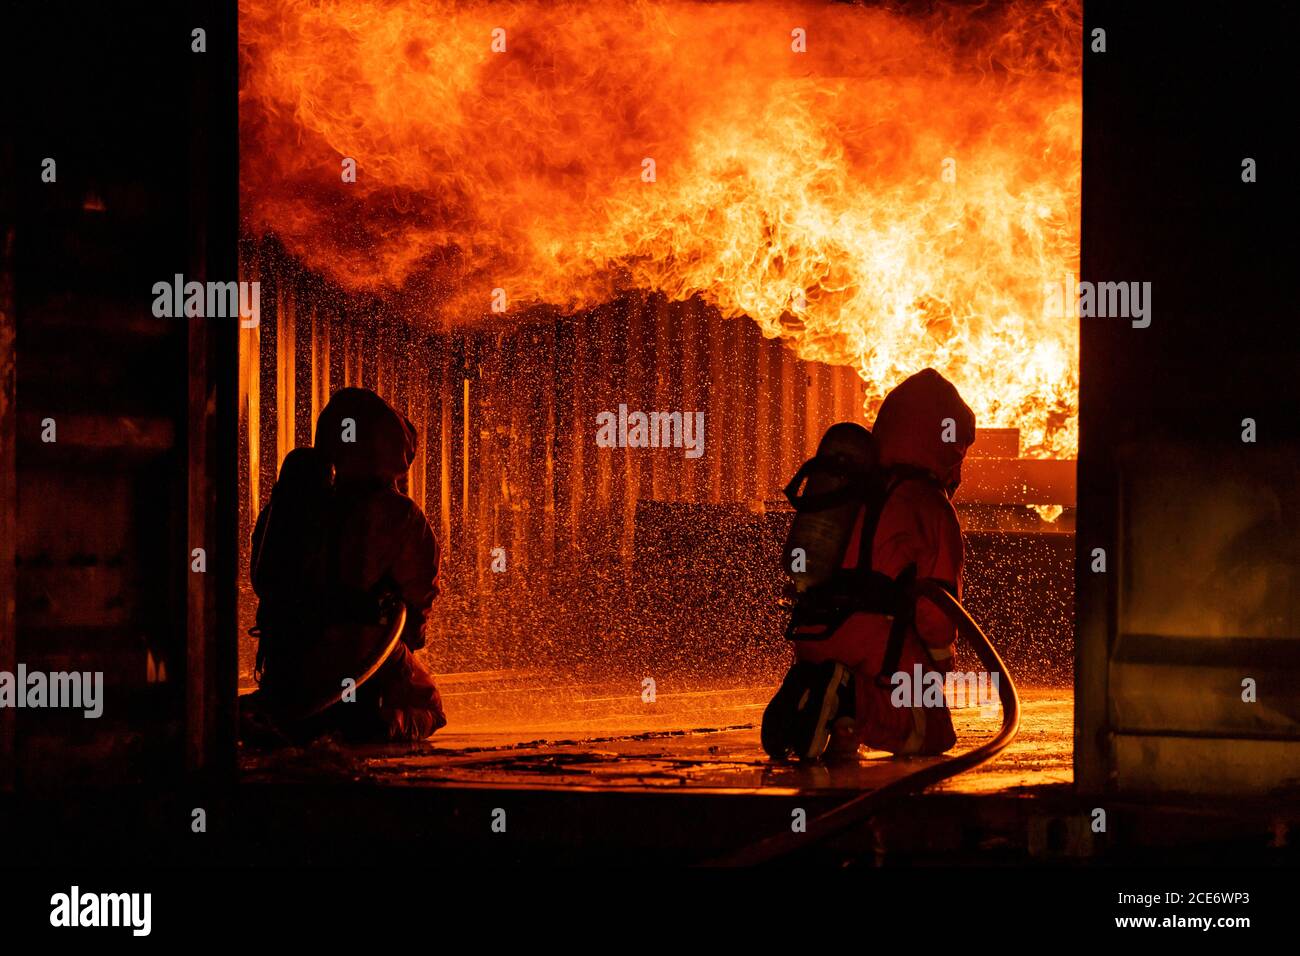 Firefighters use water fog spraying down fire flame in building. Stock Photo